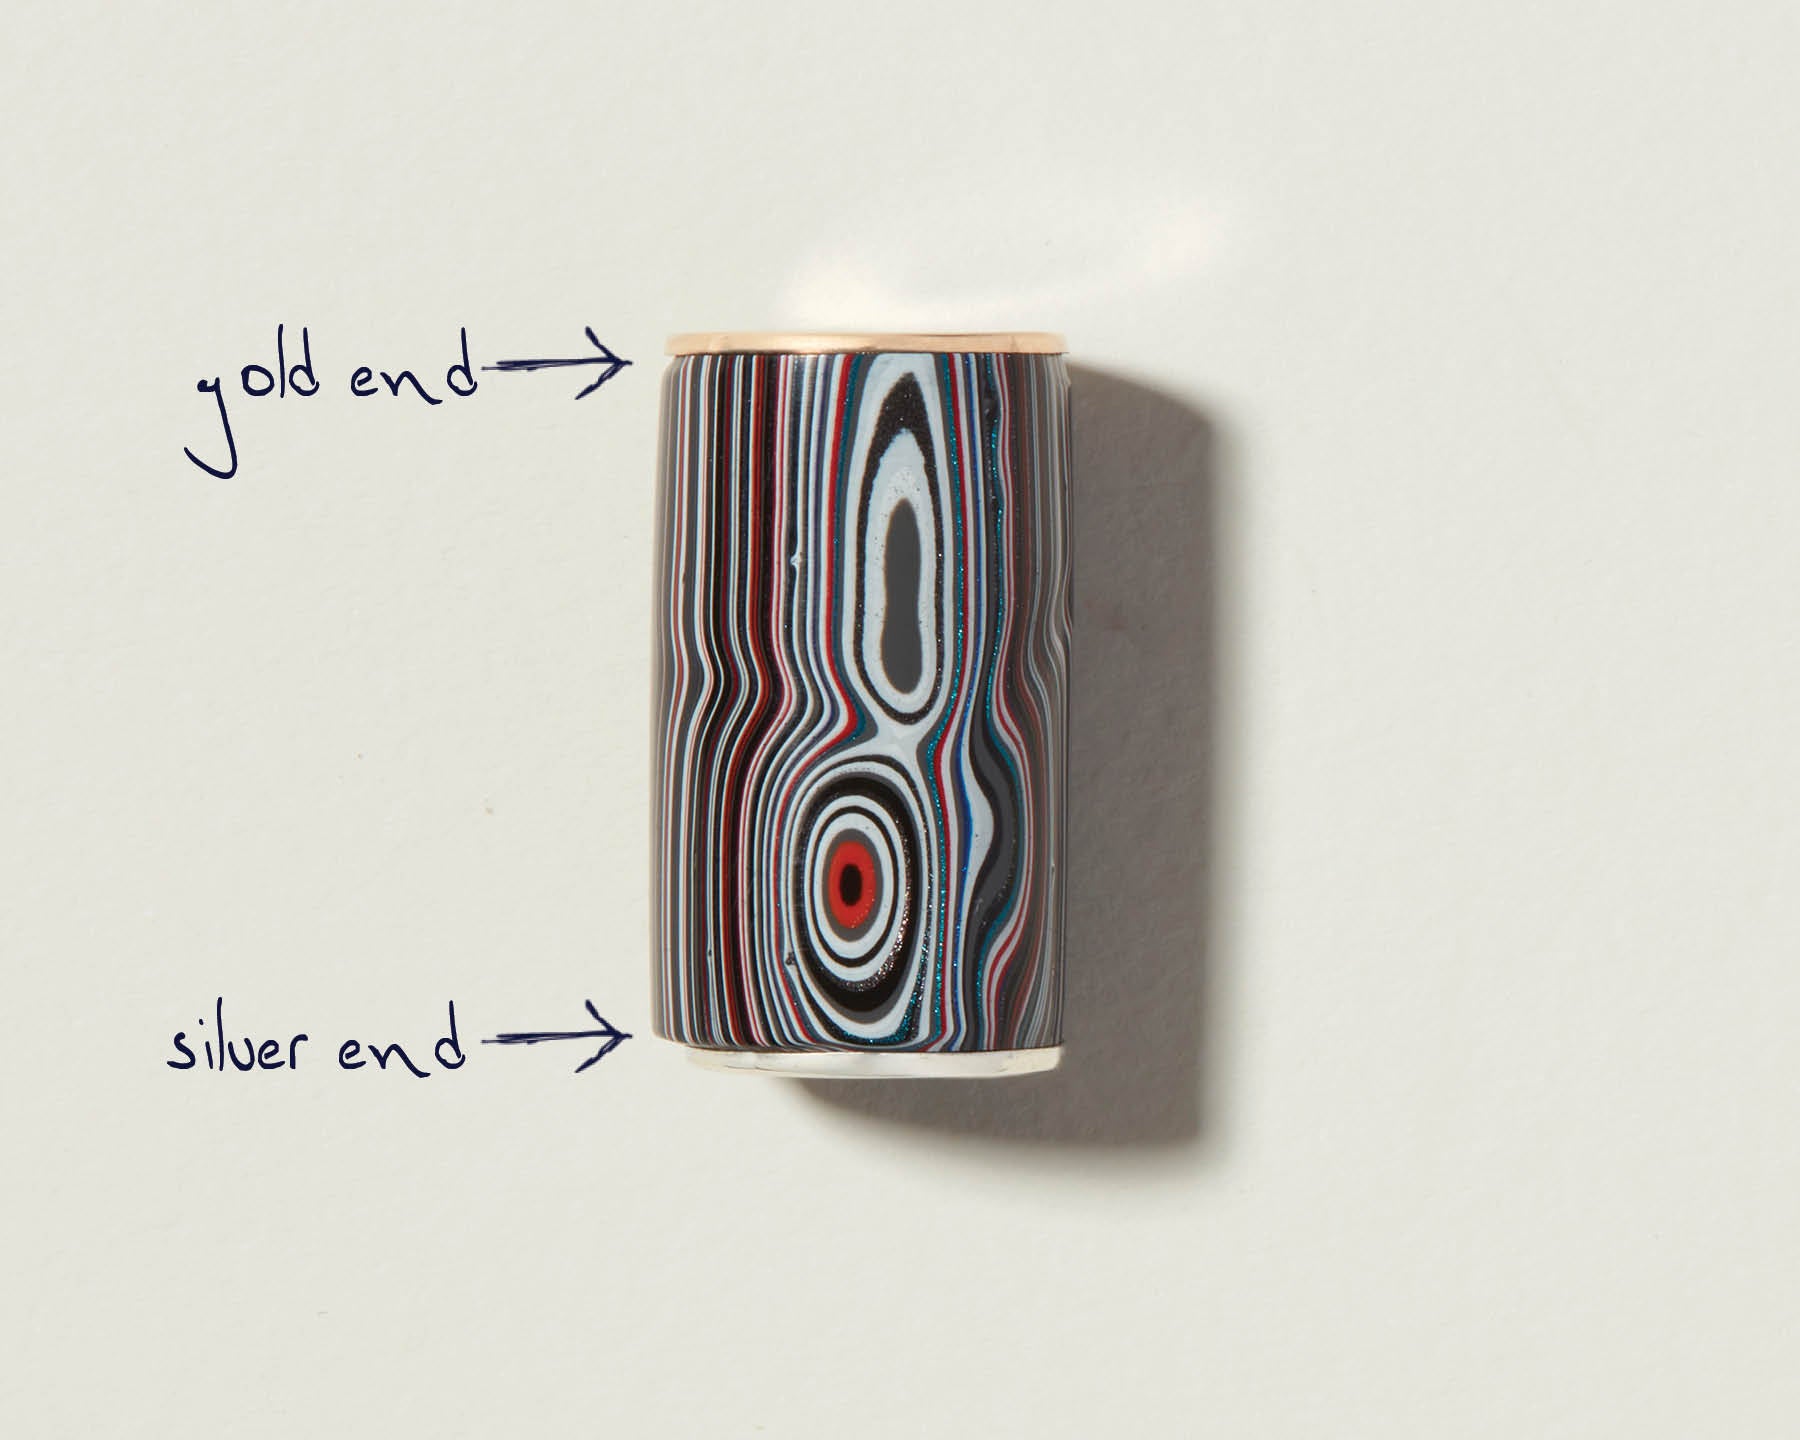 Fordite charm bead with gold and silver ends labeled against white backdrop